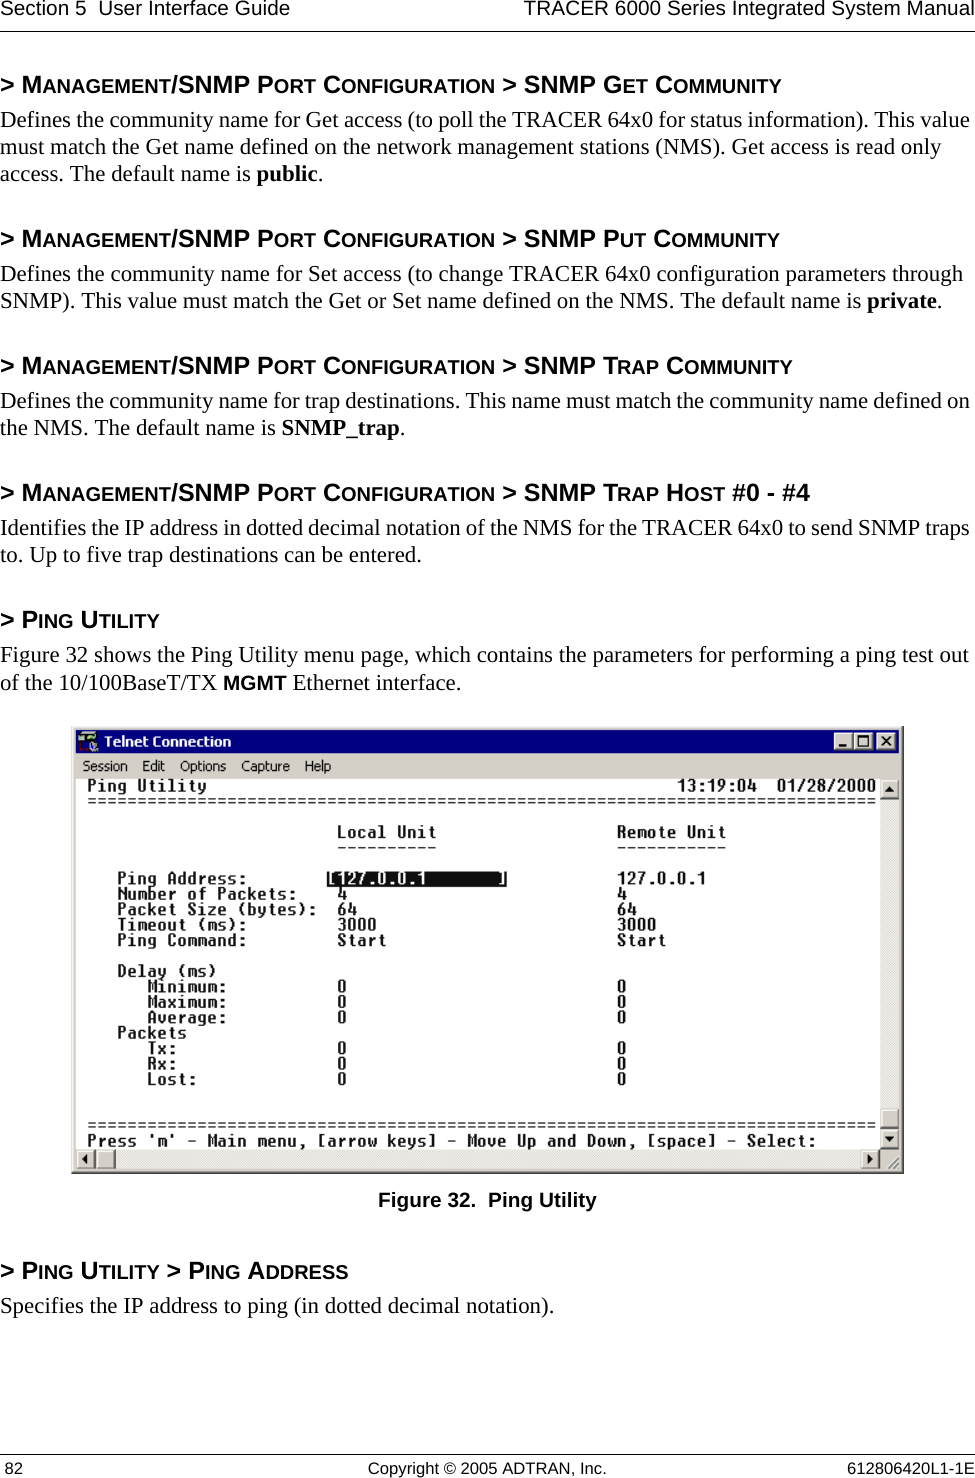 Section 5  User Interface Guide TRACER 6000 Series Integrated System Manual 82 Copyright © 2005 ADTRAN, Inc. 612806420L1-1E&gt; MANAGEMENT/SNMP PORT CONFIGURATION &gt; SNMP GET COMMUNITYDefines the community name for Get access (to poll the TRACER 64x0 for status information). This value must match the Get name defined on the network management stations (NMS). Get access is read only access. The default name is public.&gt; MANAGEMENT/SNMP PORT CONFIGURATION &gt; SNMP PUT COMMUNITYDefines the community name for Set access (to change TRACER 64x0 configuration parameters through SNMP). This value must match the Get or Set name defined on the NMS. The default name is private.&gt; MANAGEMENT/SNMP PORT CONFIGURATION &gt; SNMP TRAP COMMUNITYDefines the community name for trap destinations. This name must match the community name defined on the NMS. The default name is SNMP_trap.&gt; MANAGEMENT/SNMP PORT CONFIGURATION &gt; SNMP TRAP HOST #0 - #4Identifies the IP address in dotted decimal notation of the NMS for the TRACER 64x0 to send SNMP traps to. Up to five trap destinations can be entered.&gt; PING UTILITYFigure 32 shows the Ping Utility menu page, which contains the parameters for performing a ping test out of the 10/100BaseT/TX MGMT Ethernet interface. Figure 32.  Ping Utility&gt; PING UTILITY &gt; PING ADDRESSSpecifies the IP address to ping (in dotted decimal notation).